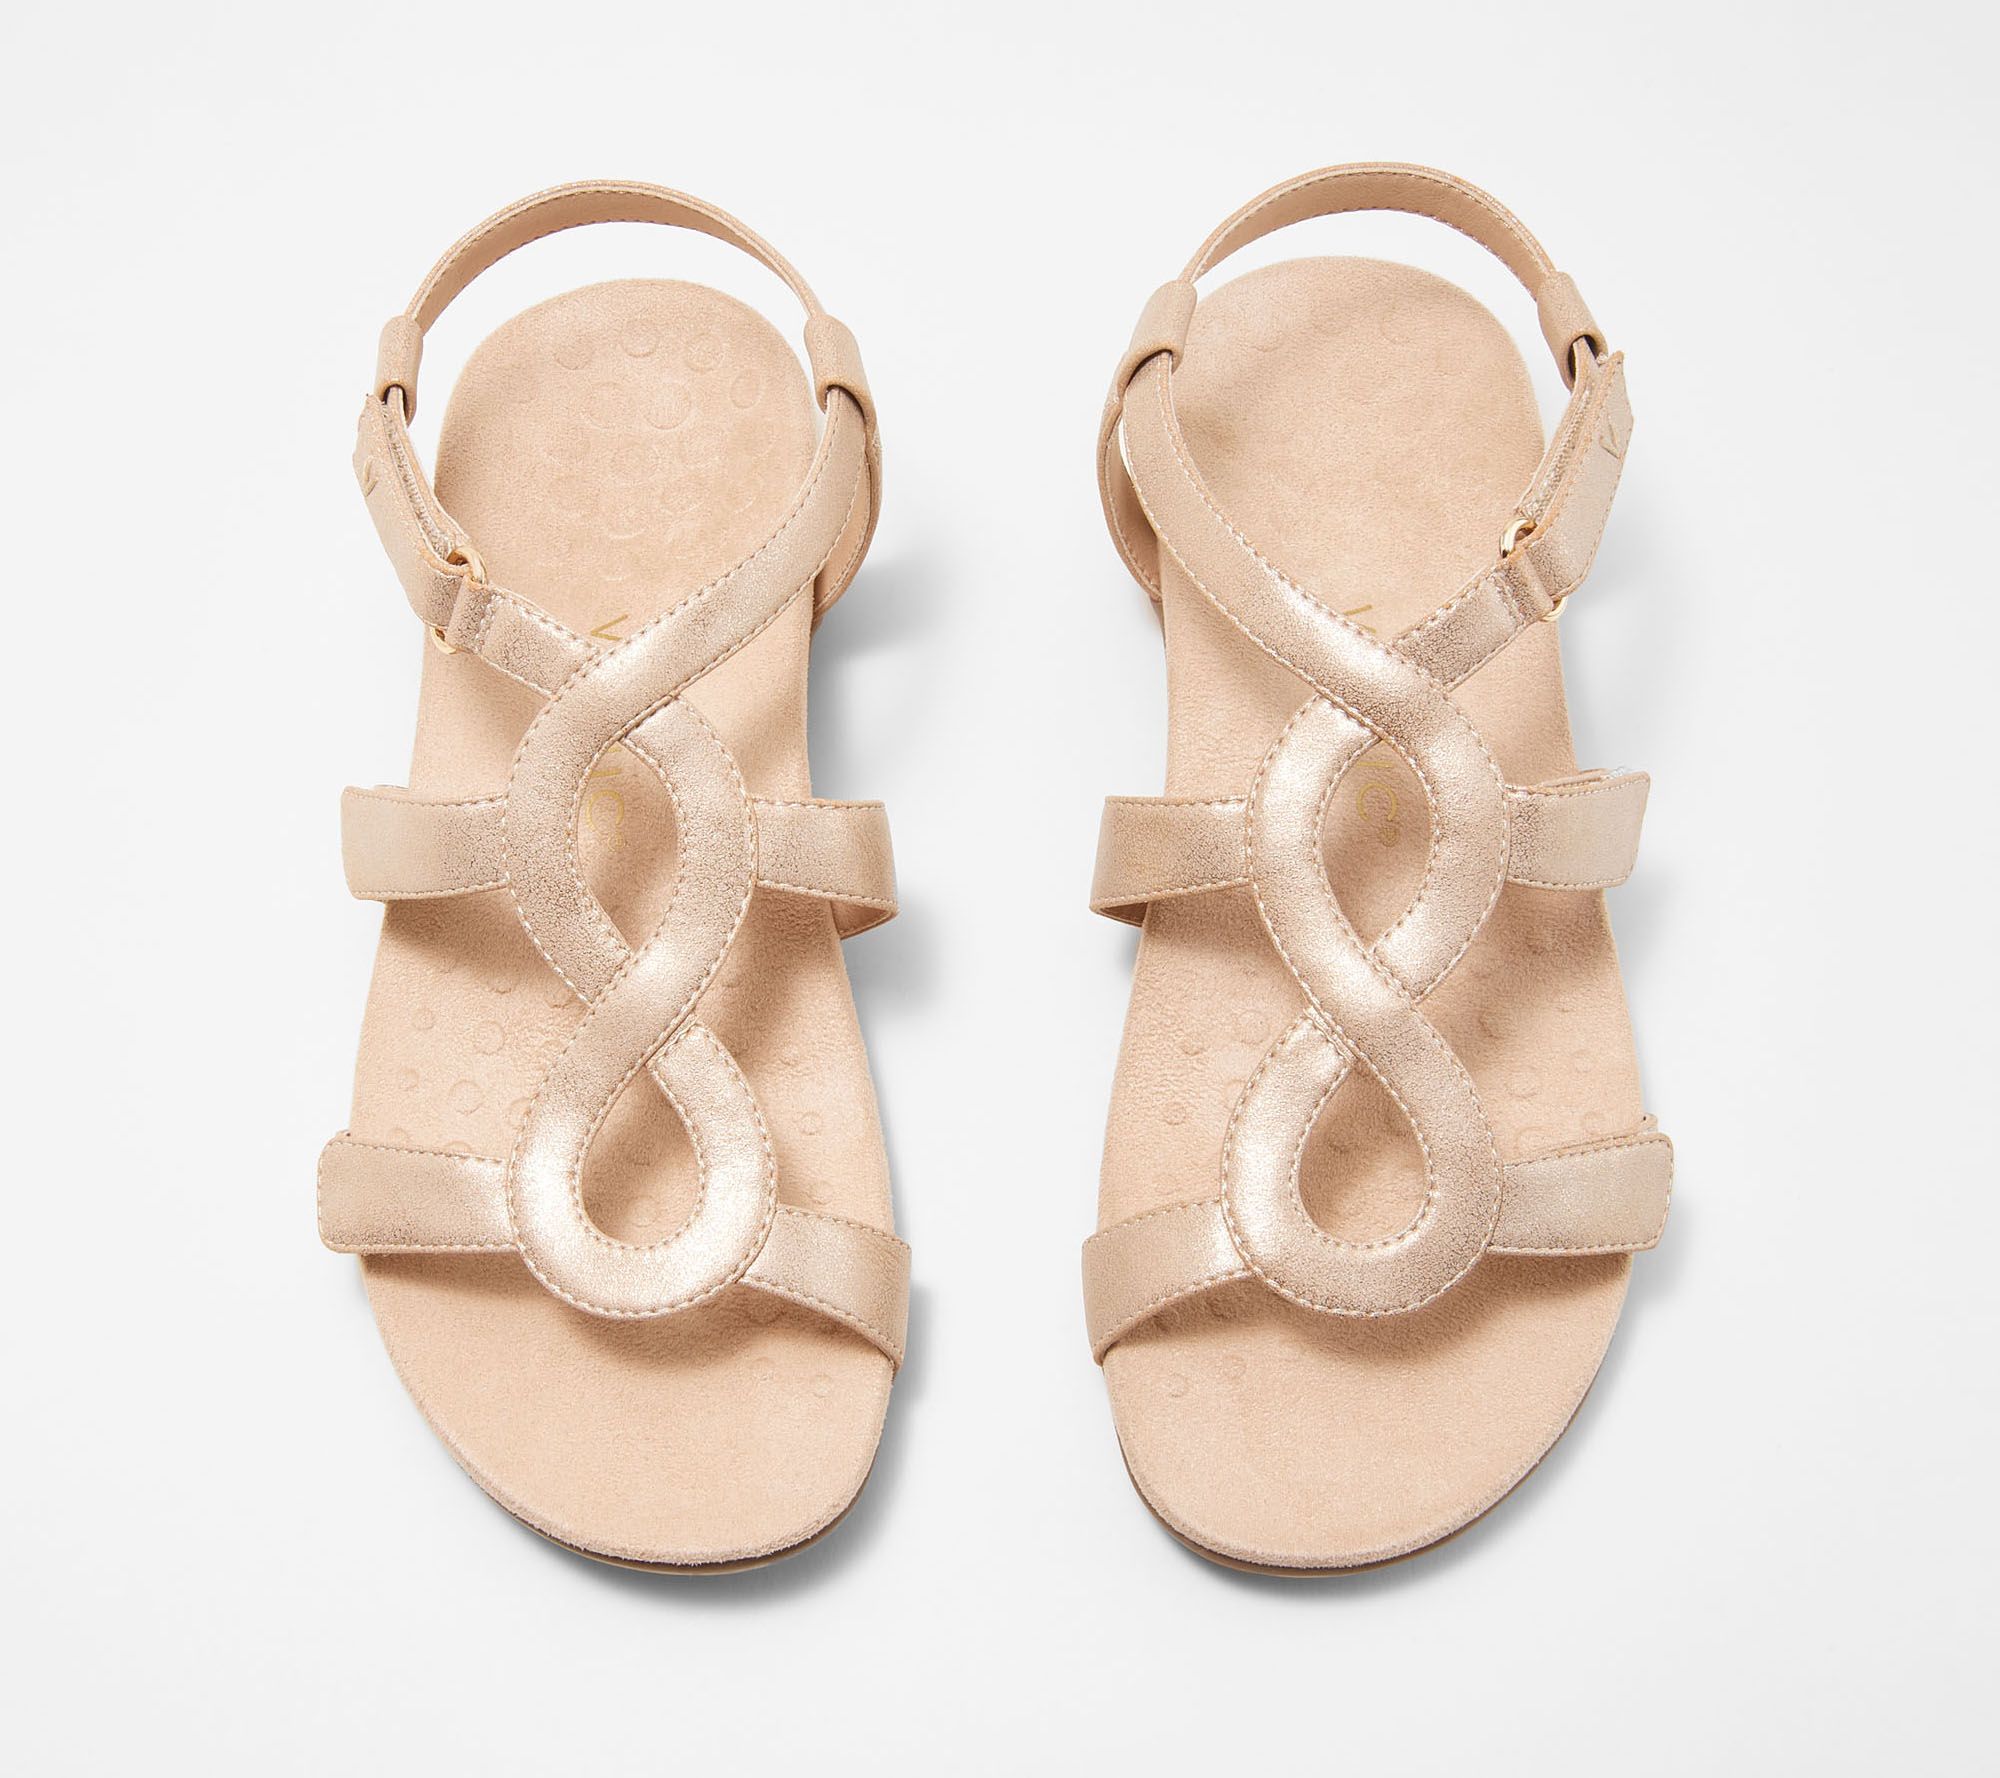 vionic sandals with backstrap